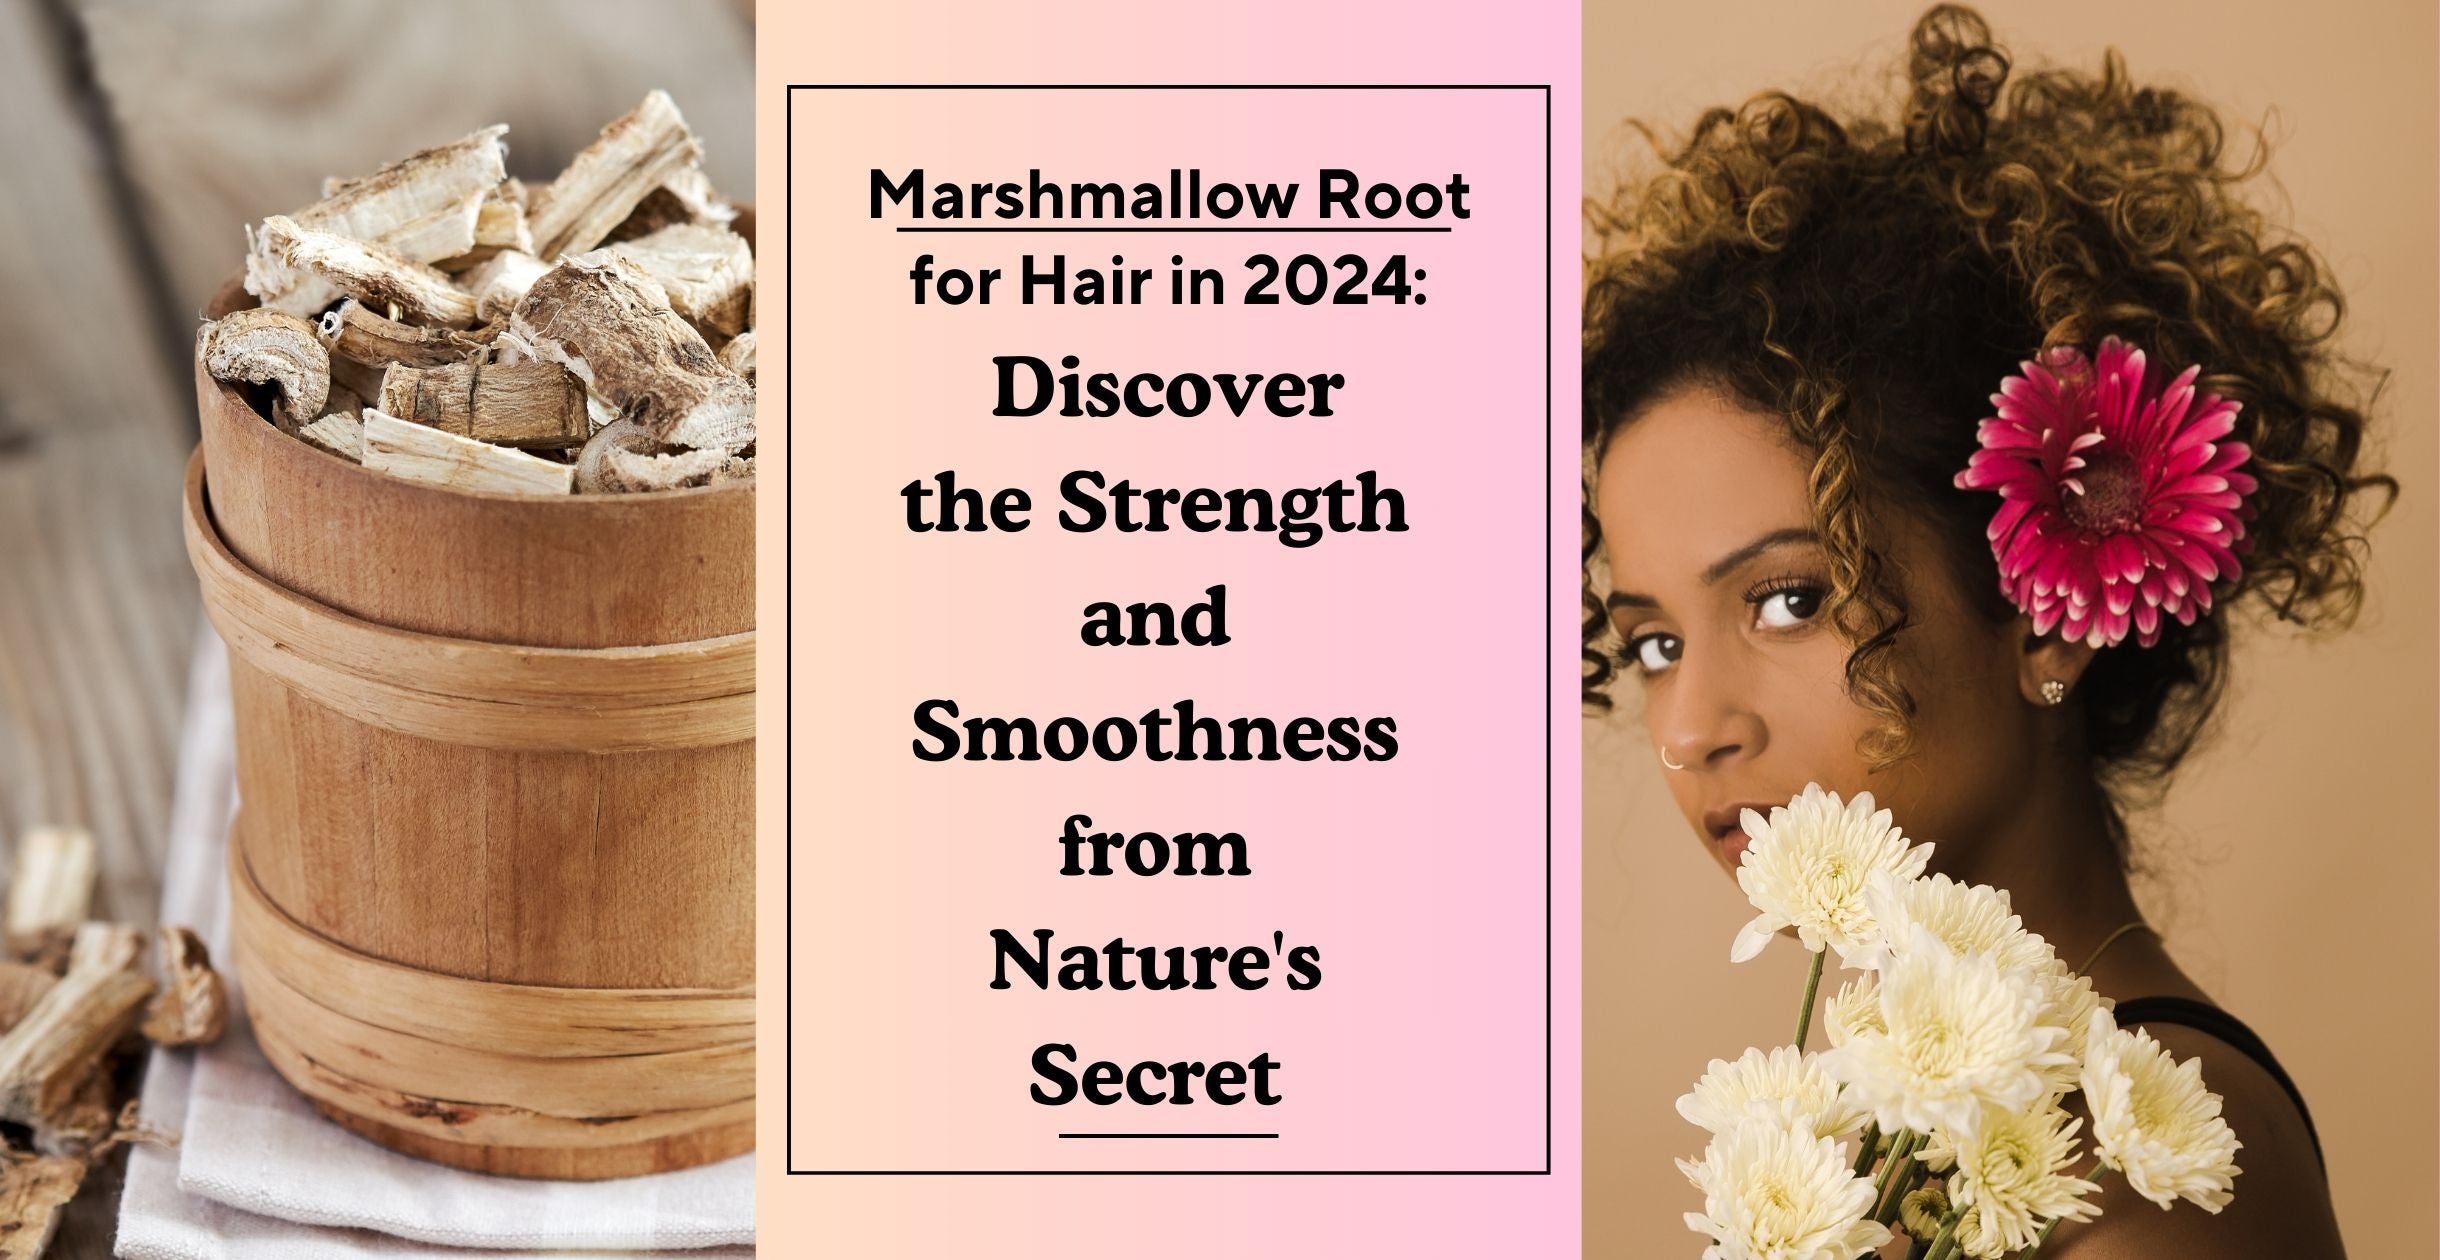 Marshmallow Root for Hair in 2024: Discover the Strength and Smoothness from Nature's Secret